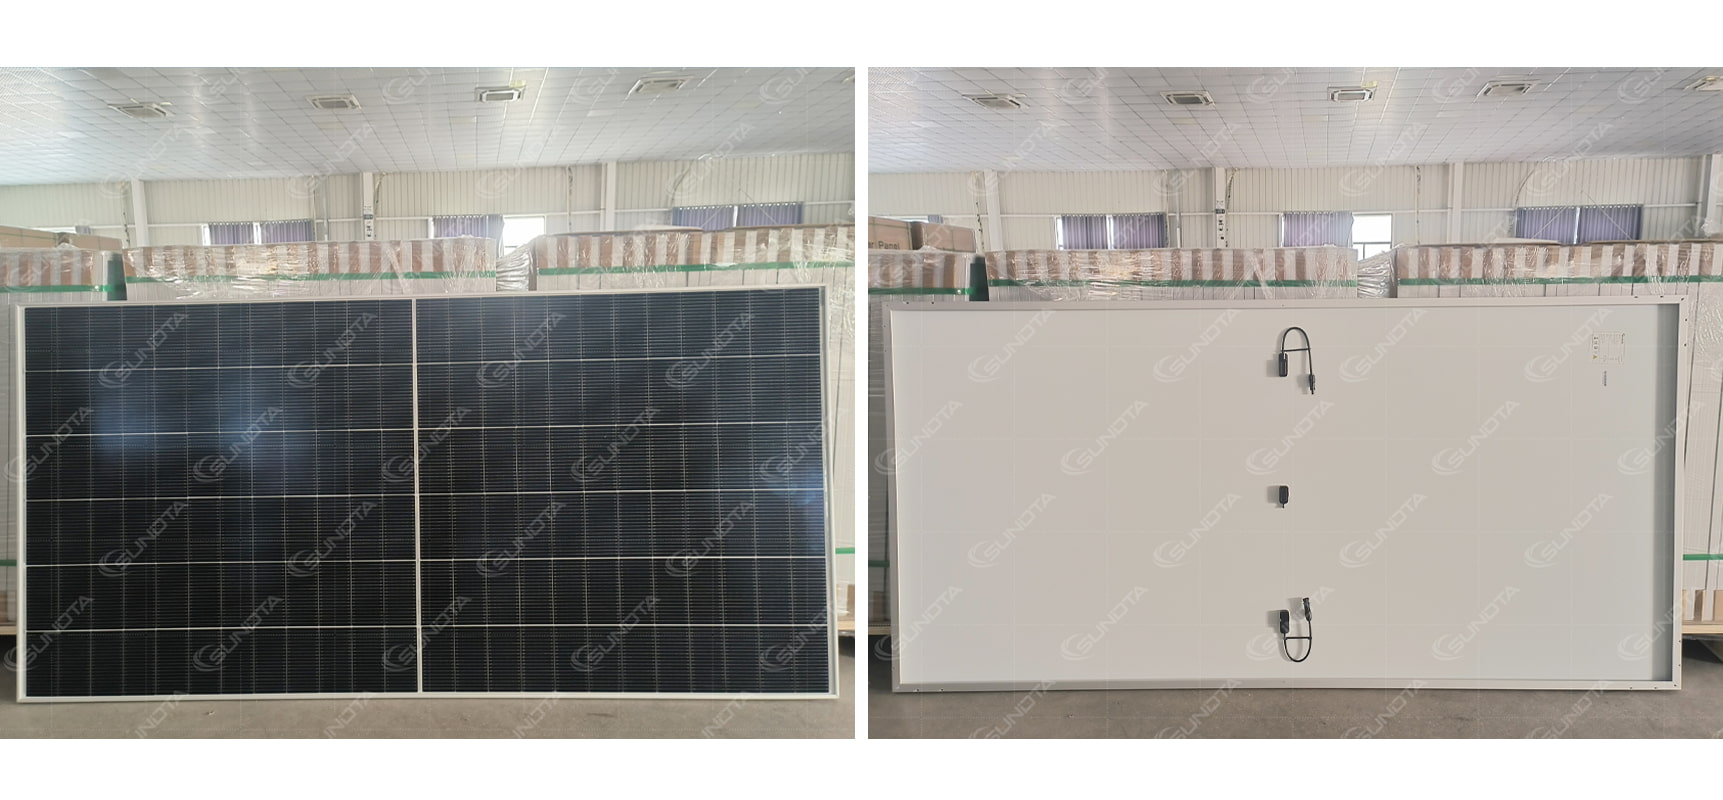 SUNDTA N-type 585W solar panels ready to be packaged and shipped.